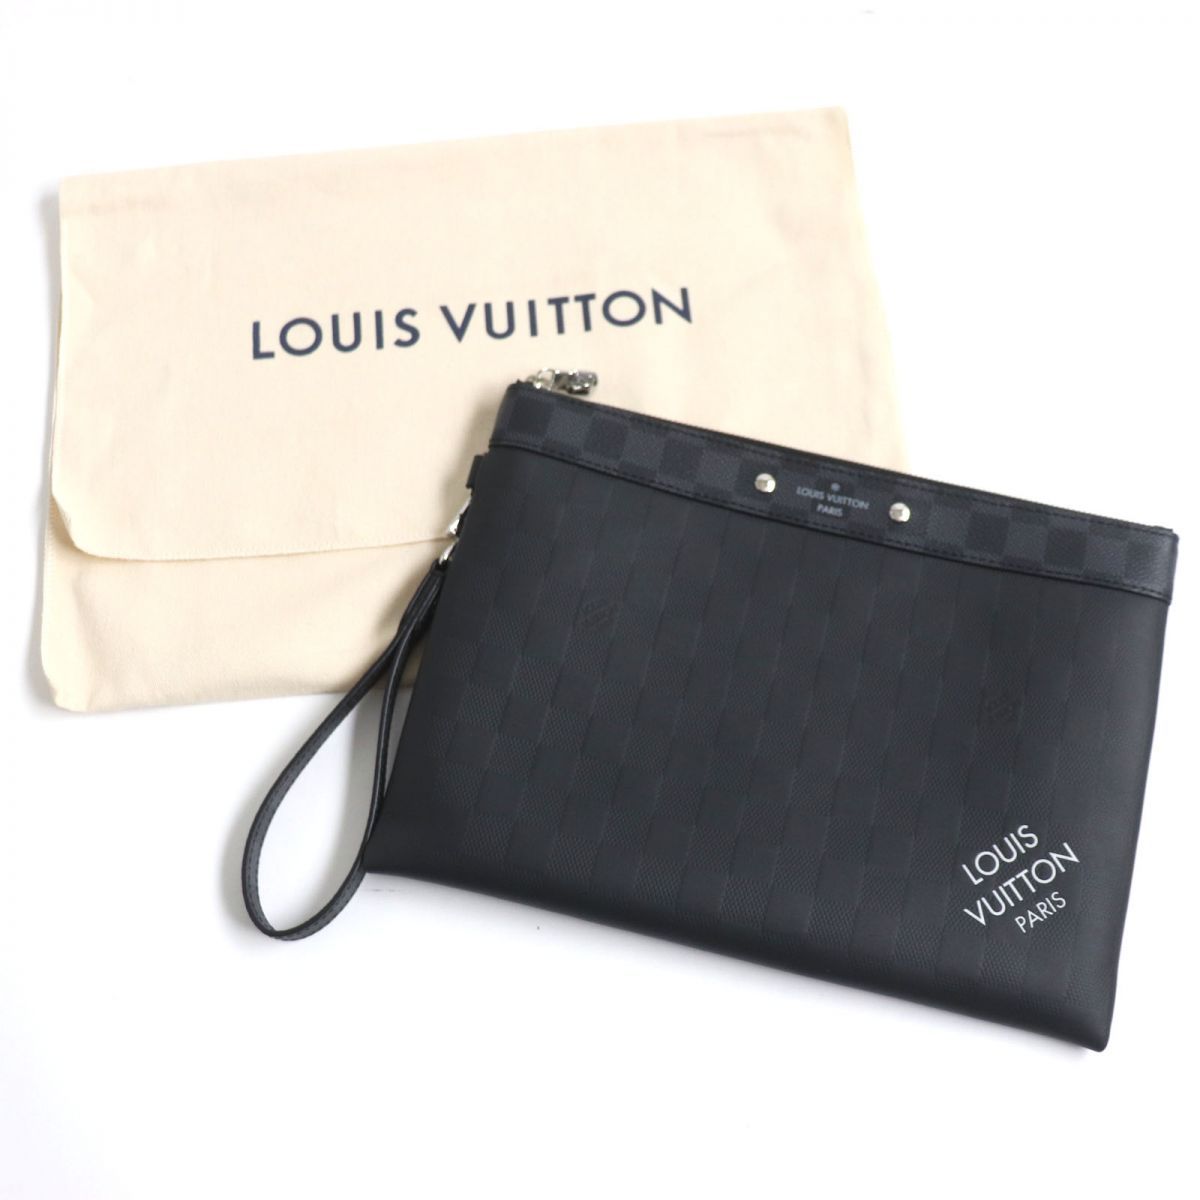 LOUIS VUITTON クラッチバッグ ポシェット トゥ ゴー A 極美品